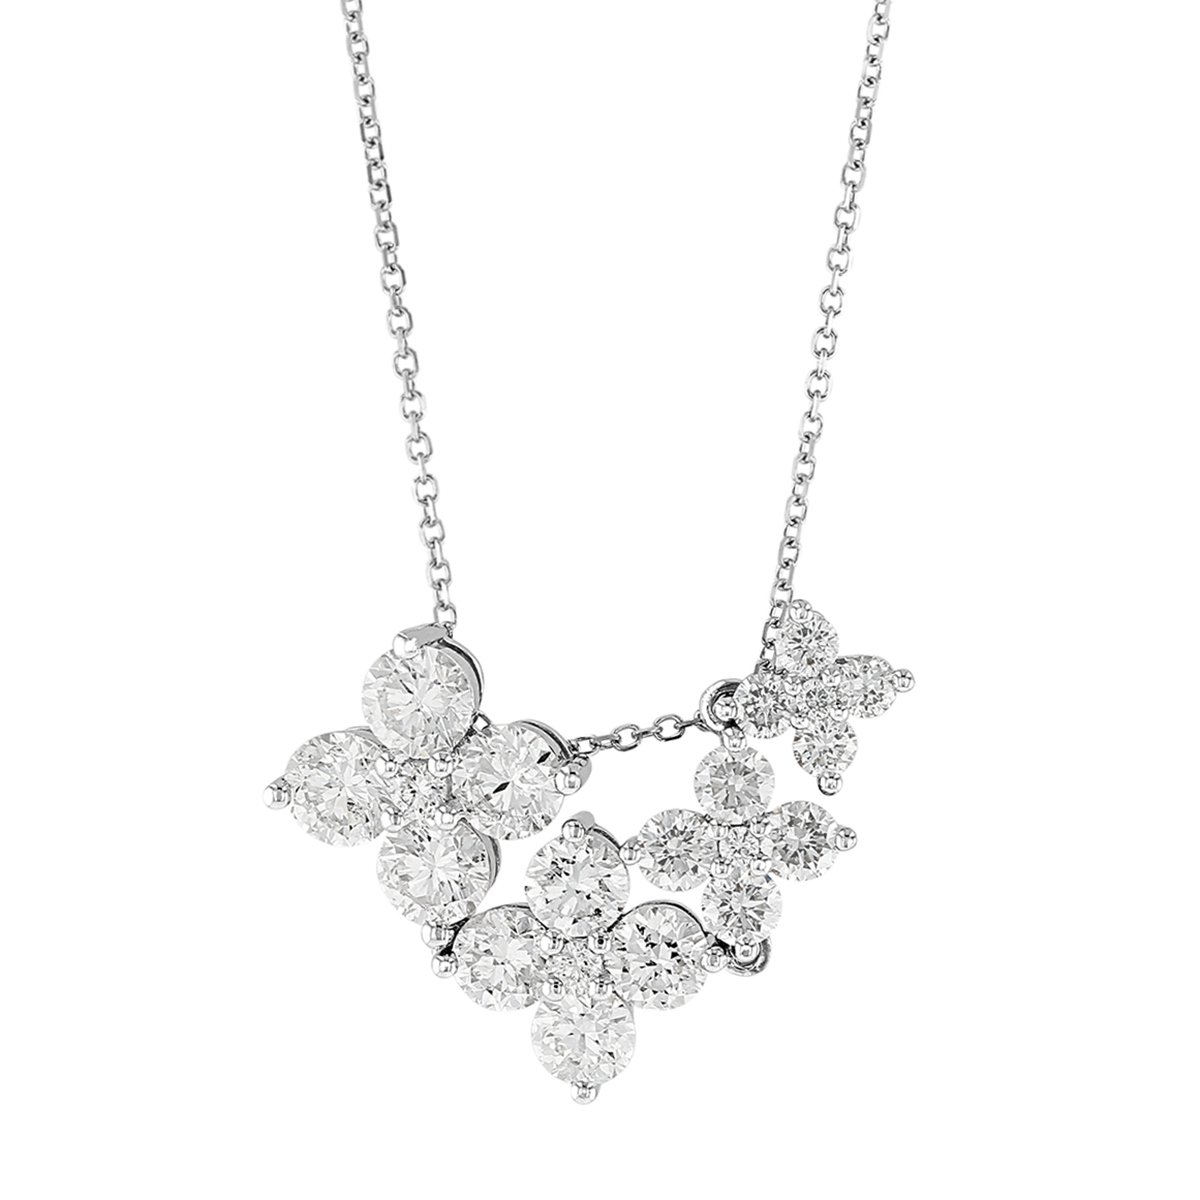 Diamond 4 Flower Cluster Necklace in White Gold, 18